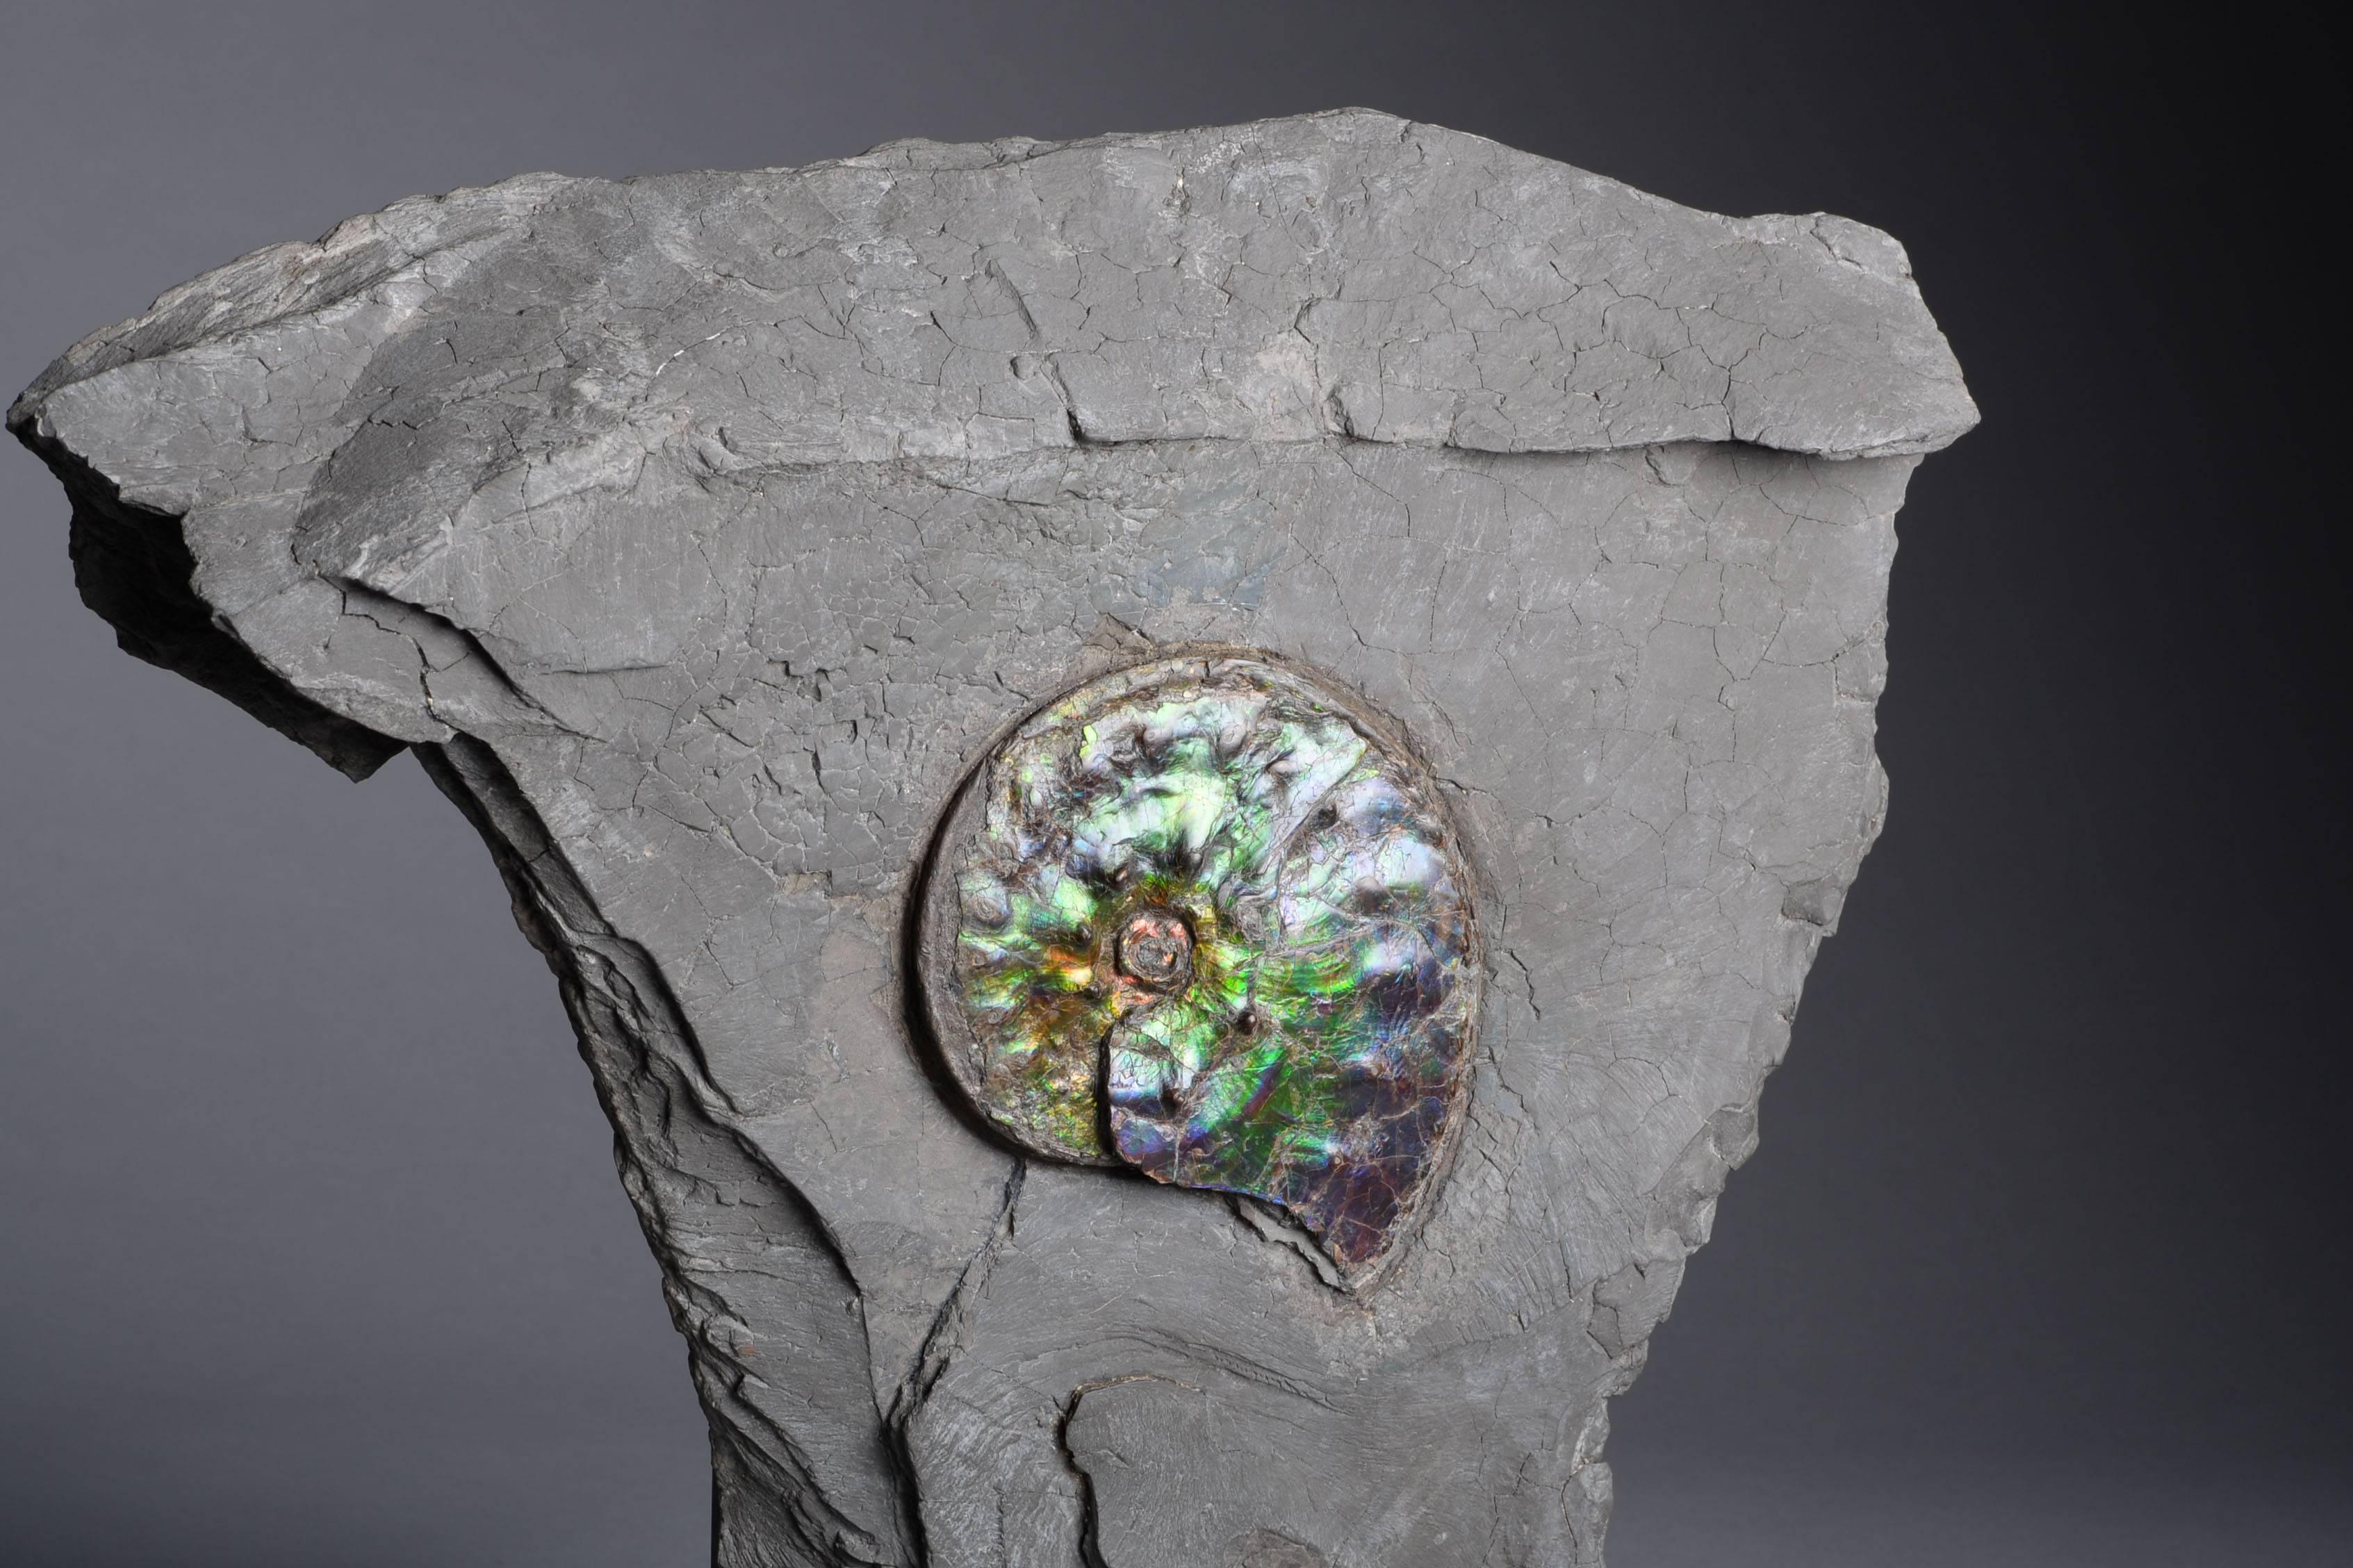 Ammonites from the Bearpaw Formation such as this are regarded as some of the most beautiful fossils known to man. 

This remarkable display piece shows one side of the ammonite, Placenticeras costatum, within a rocky matrix, dating to the late